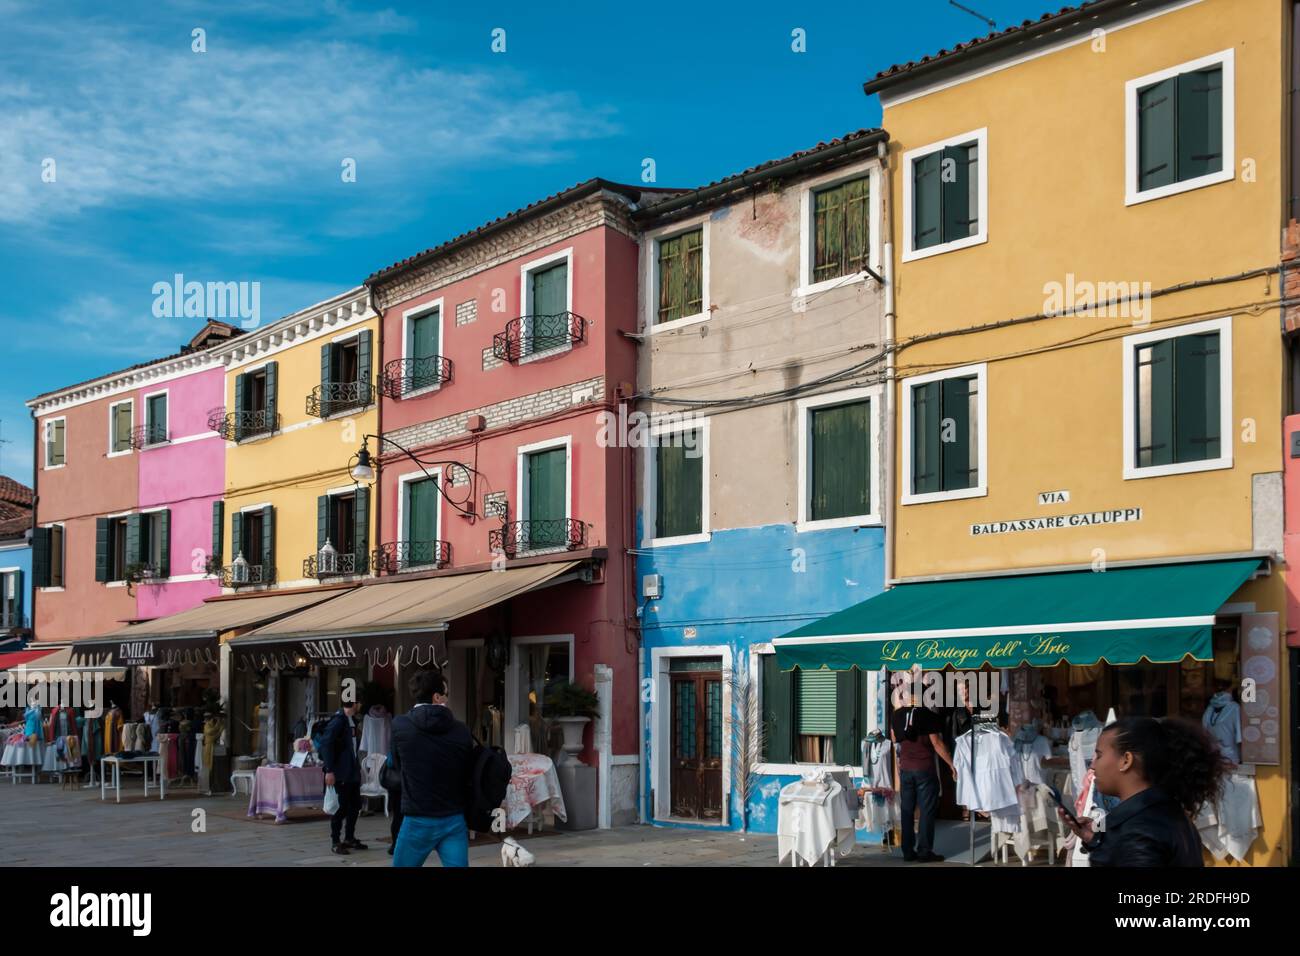 Burano, Italy - April 27, 2019 : Burano island in the Venetian lagoon, with its brightly coloured homes, souvenir shops and restaurants Stock Photo